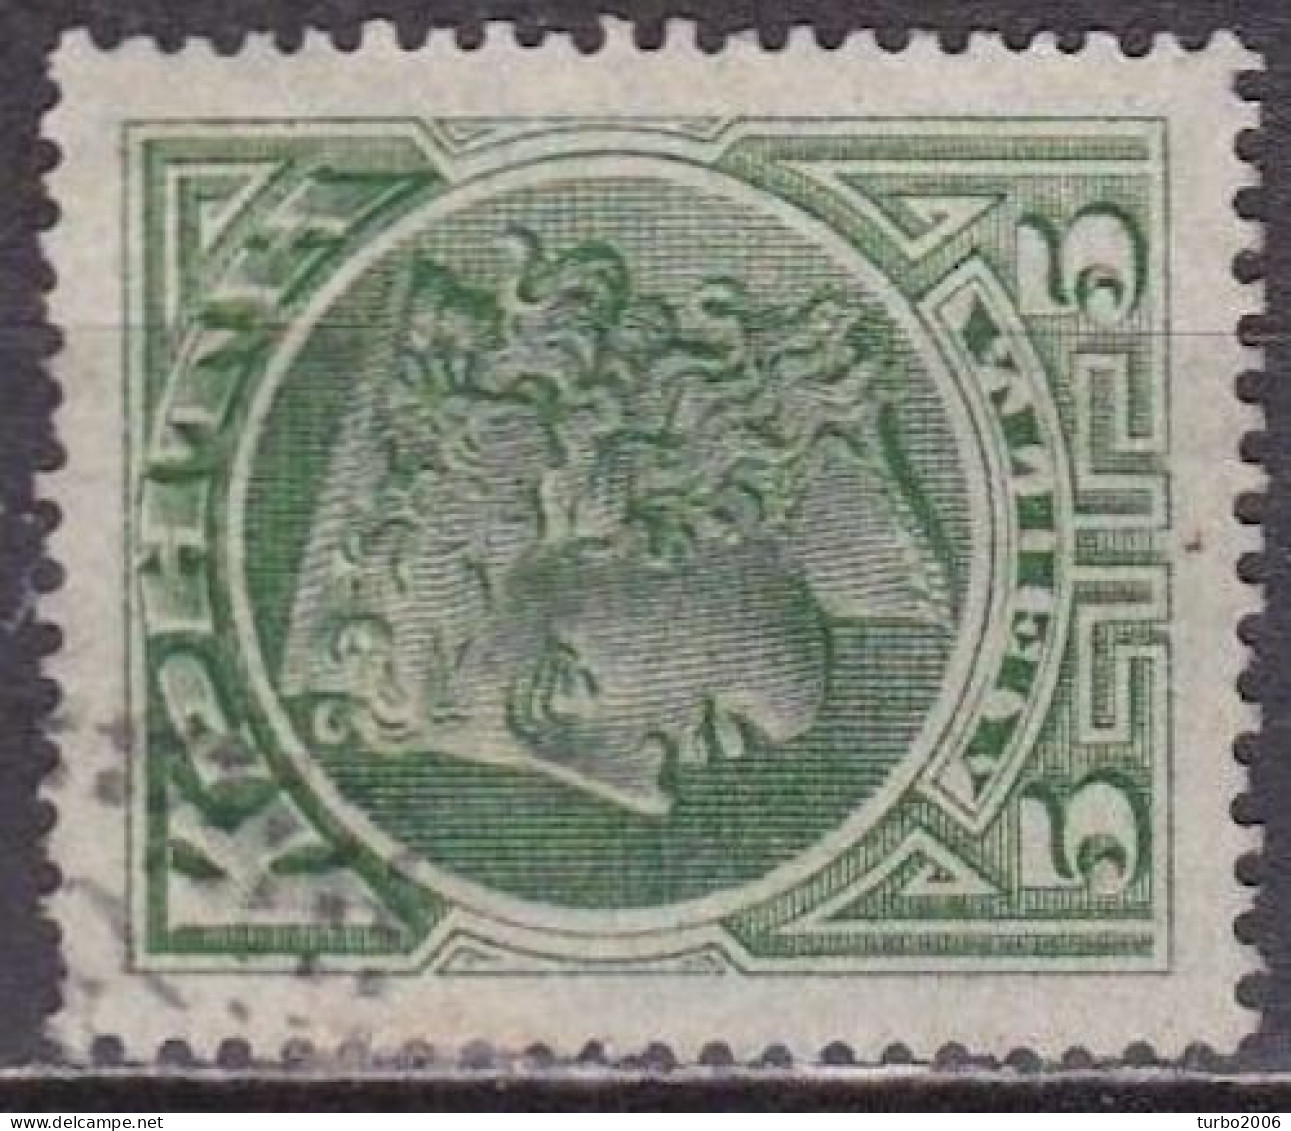 CRETE 1900 1st Issue Of The Cretan State 5 L. Green Vl. 2 With Dotted Rural Cancellation 8 - Crete